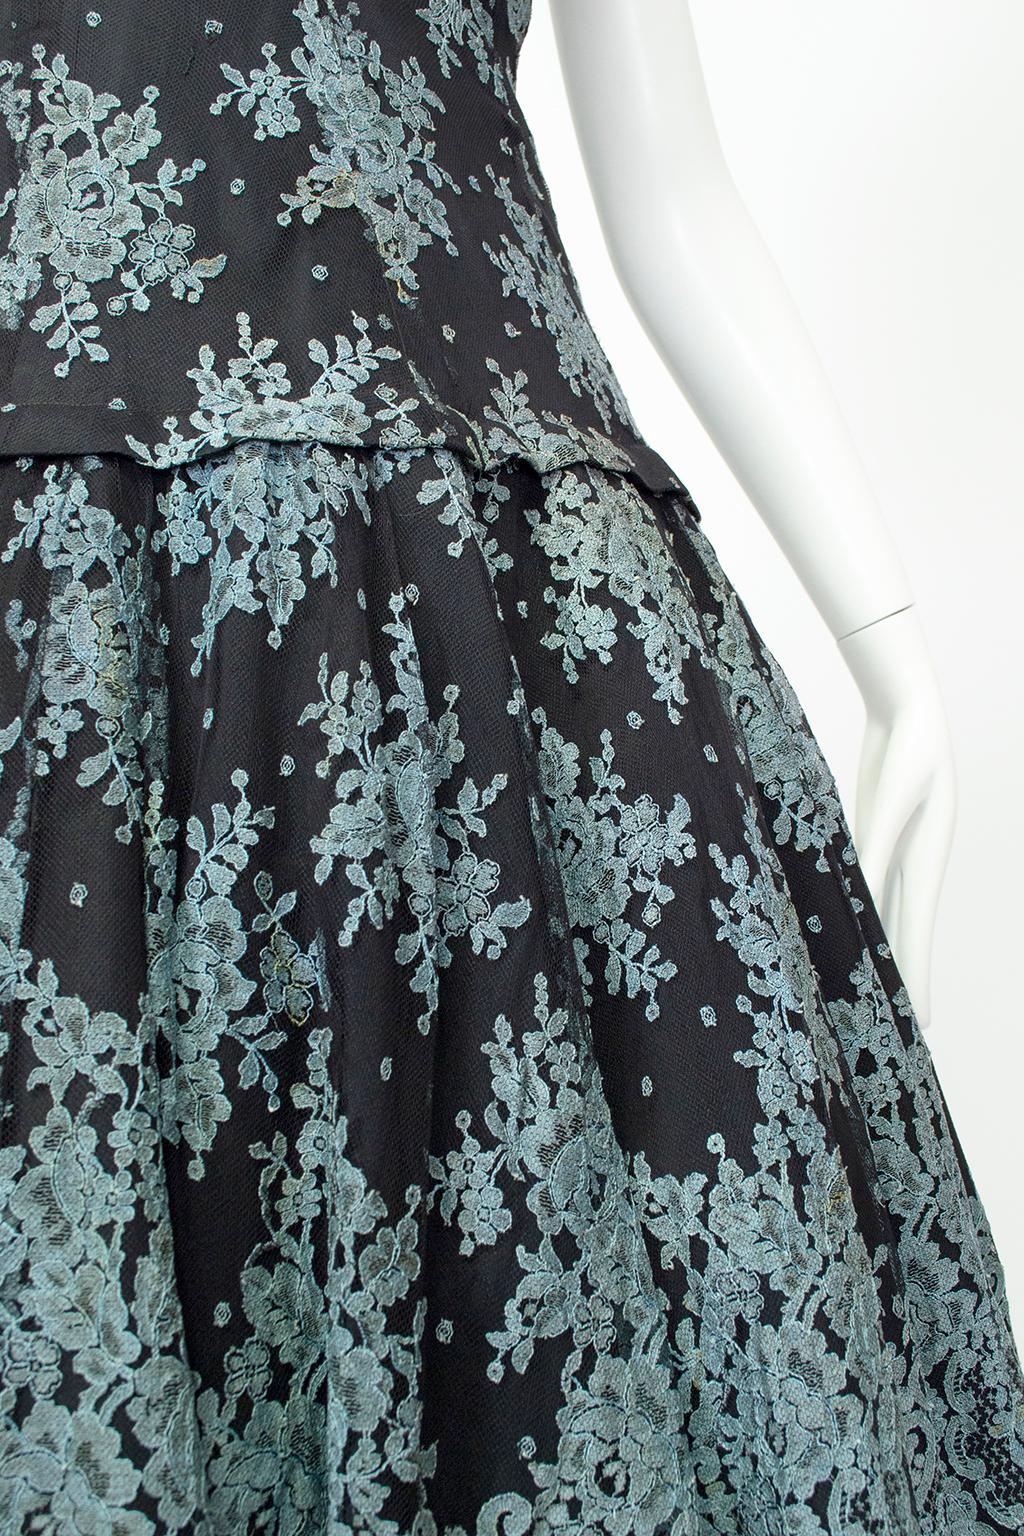 Bespoke Spanish Blue and Black Lace Mantilla Drop Waist Party Dress – XS, 1950s For Sale 5